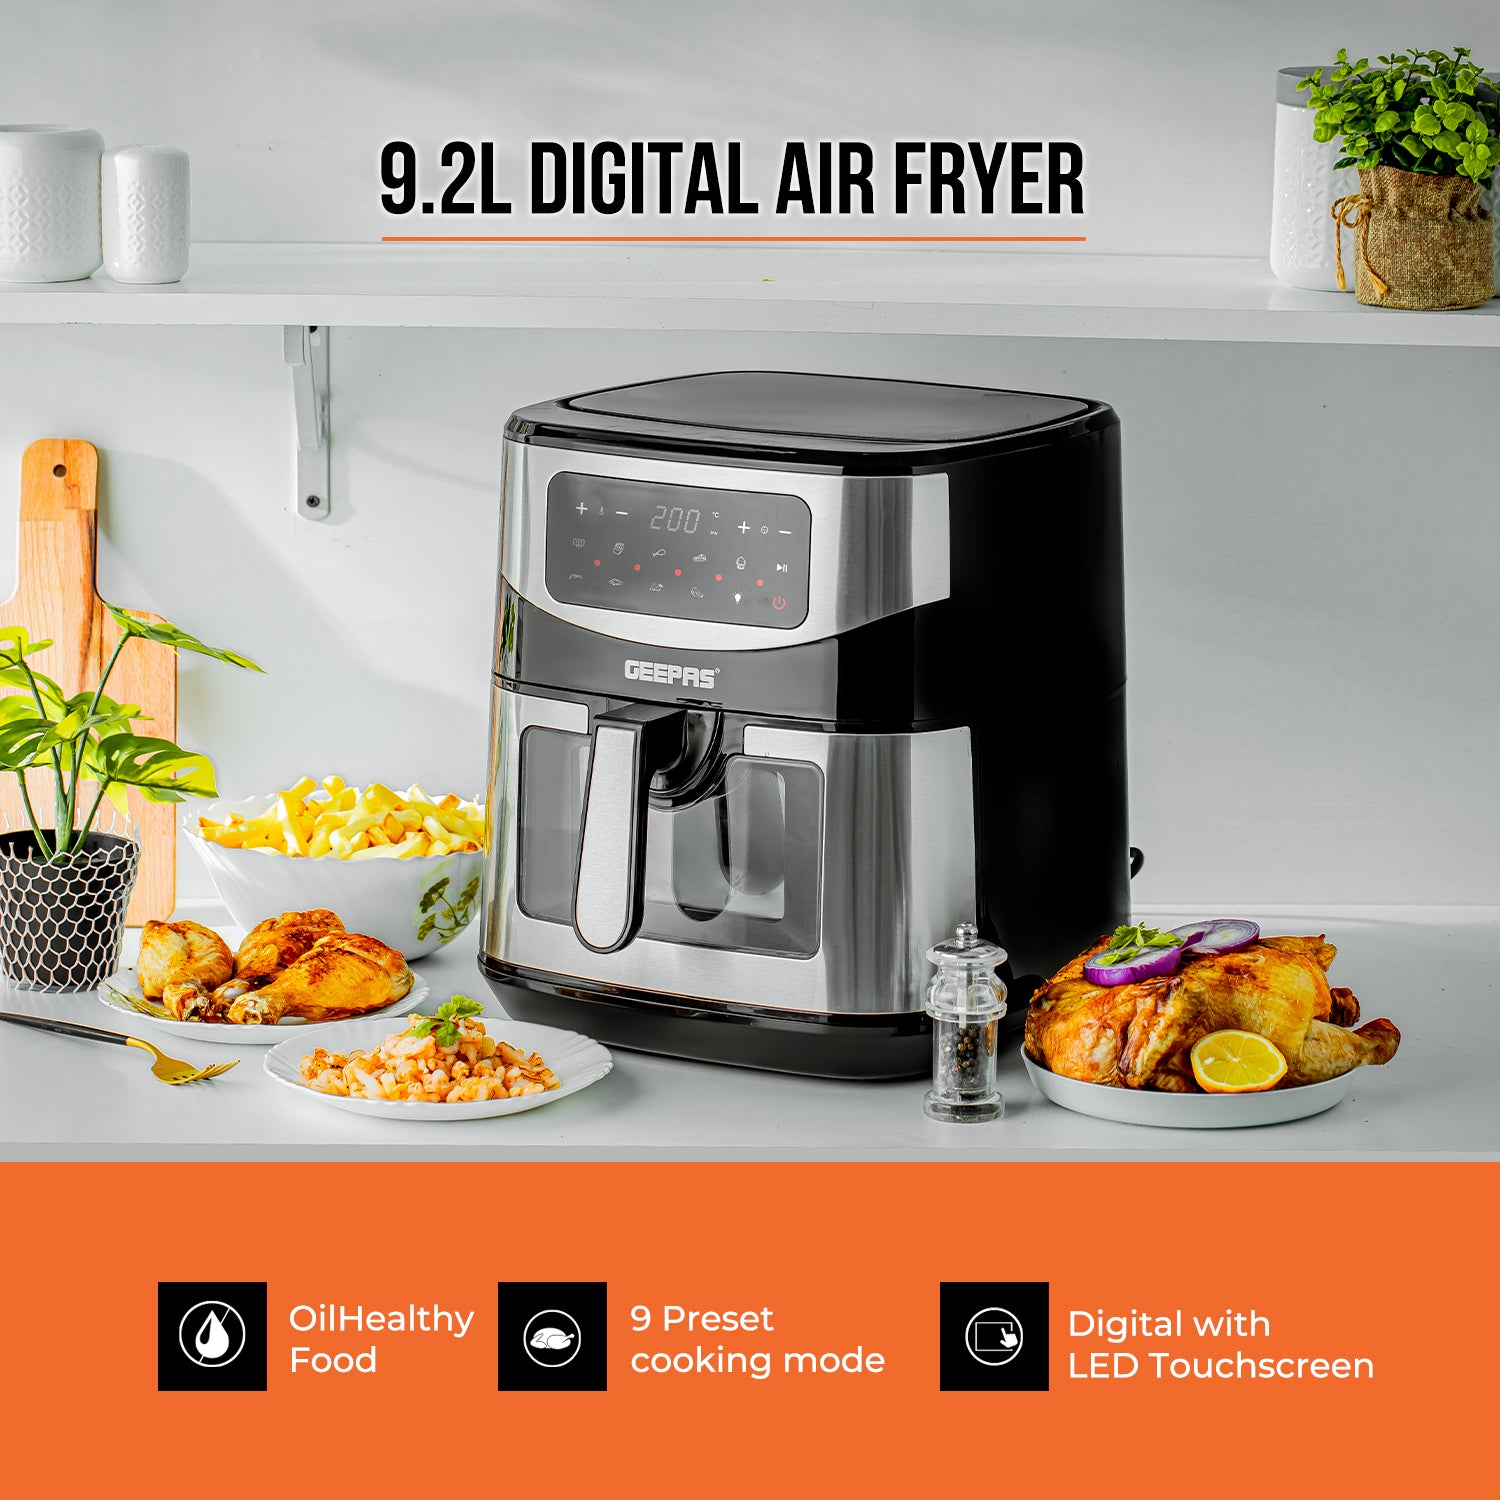 Image showing off the three main features of the 9.2 litre air fryer - oil free healthy cooking, 9 preset cooking modes, digital air fryer with an LED touchscreen display.